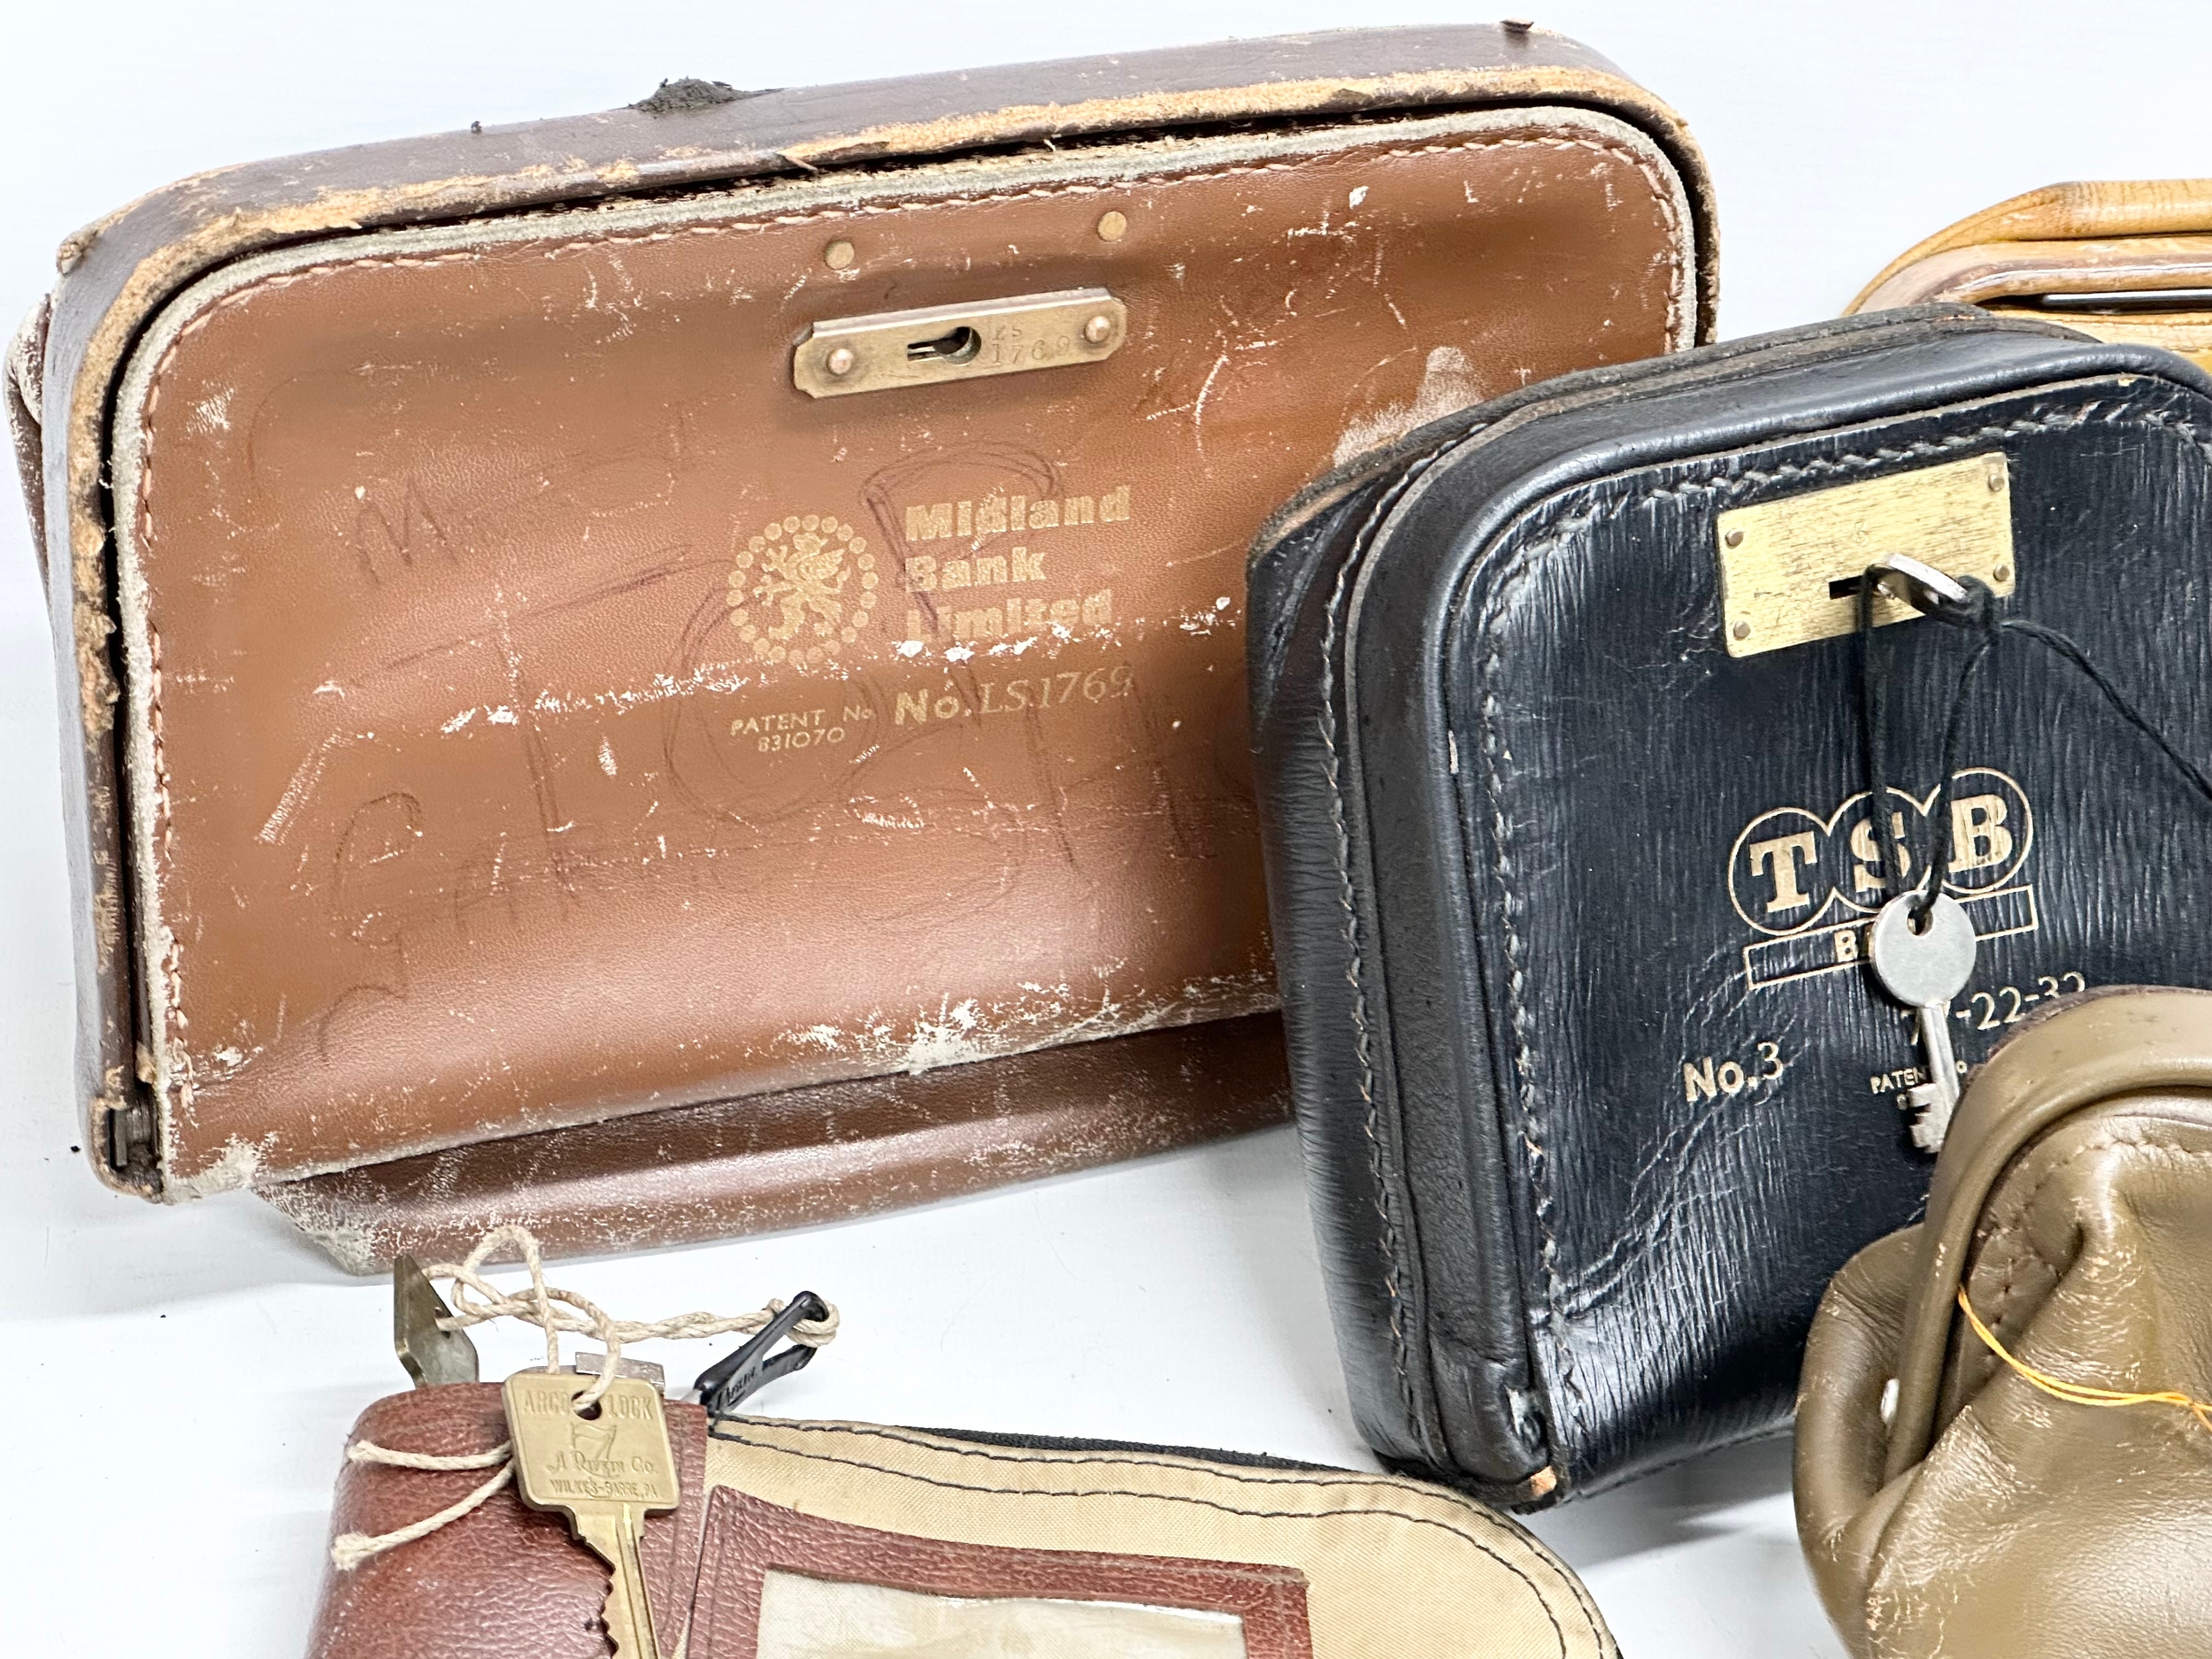 8 vintage Midland Bank and Westminster Bank leather safe bags. - Image 2 of 5